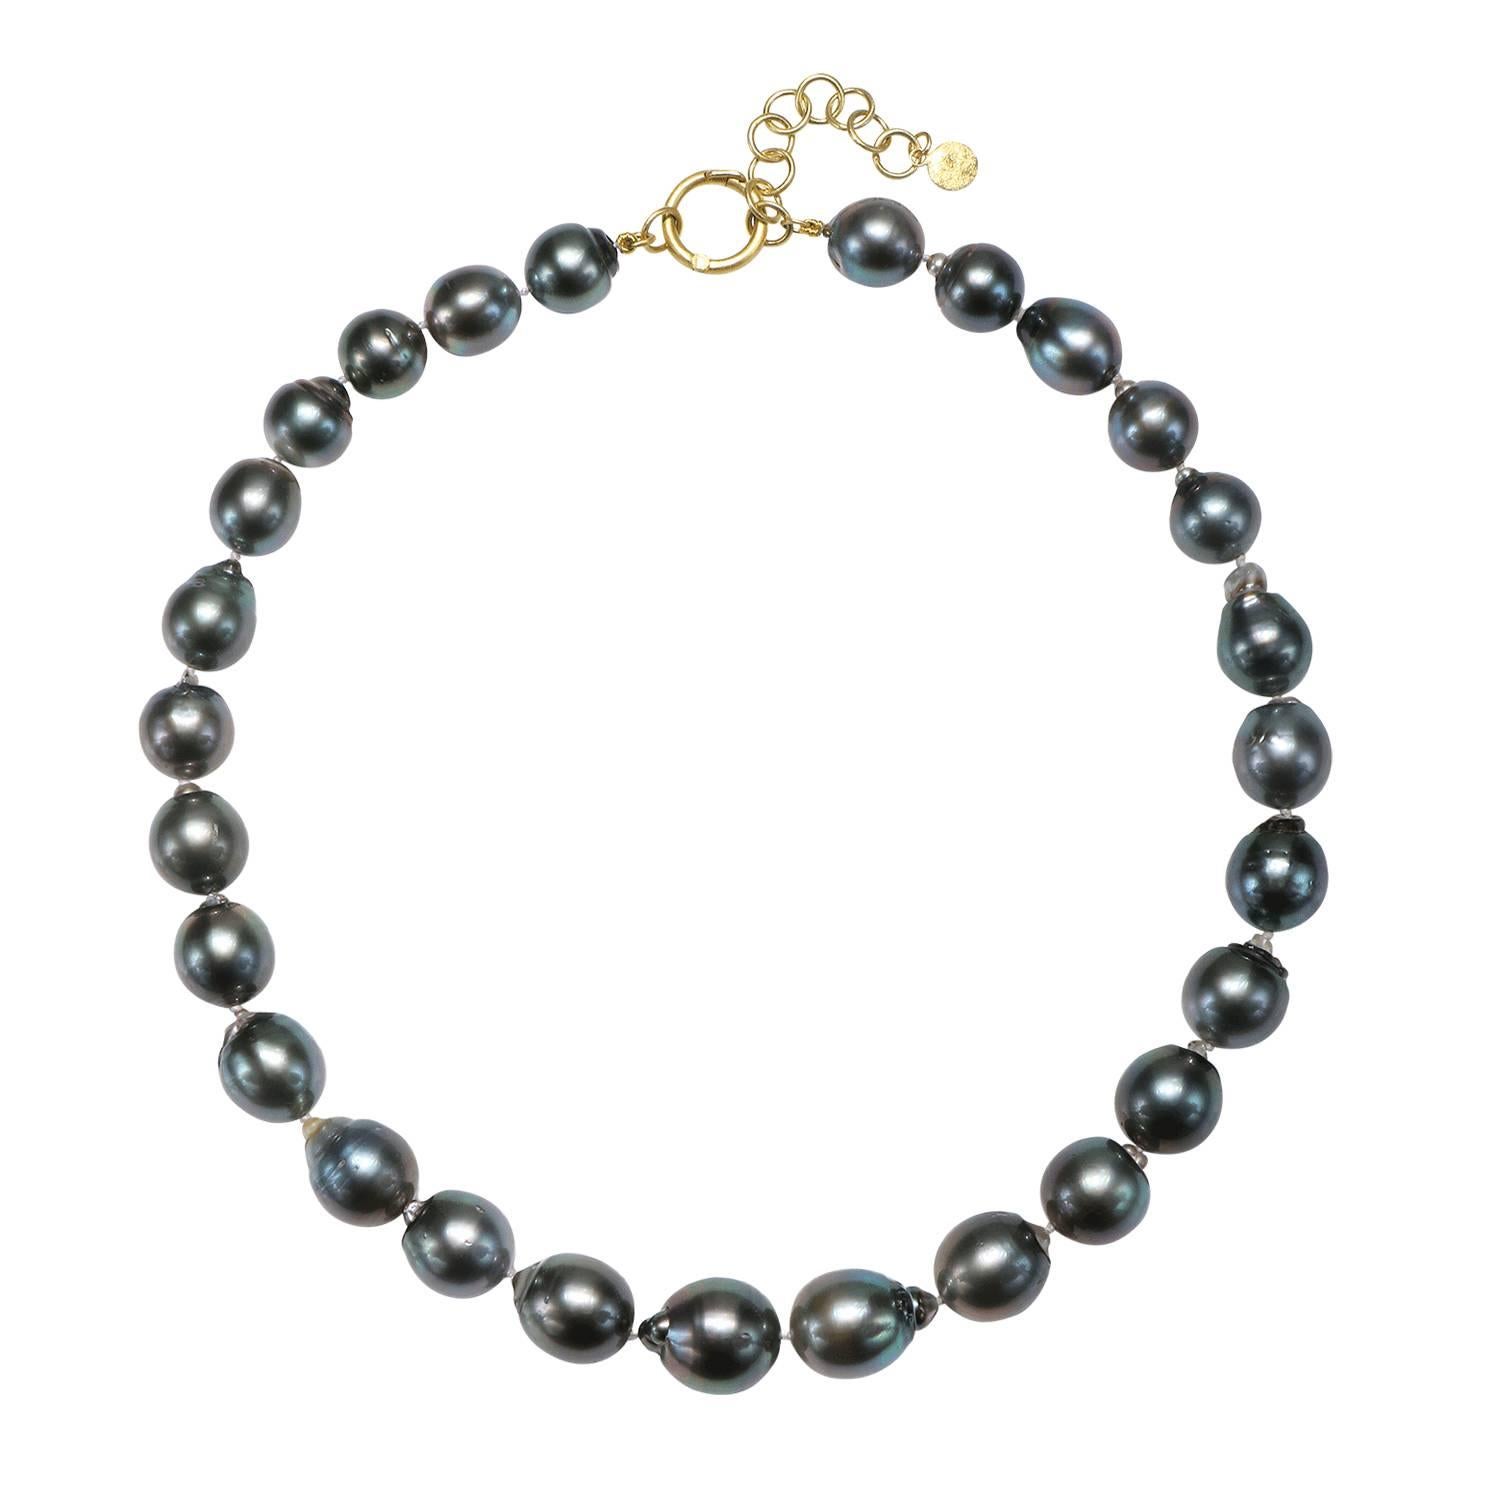 Faye Kim 18k Gold Black Tahitian Baroque Cultured Pearl Necklace For Sale